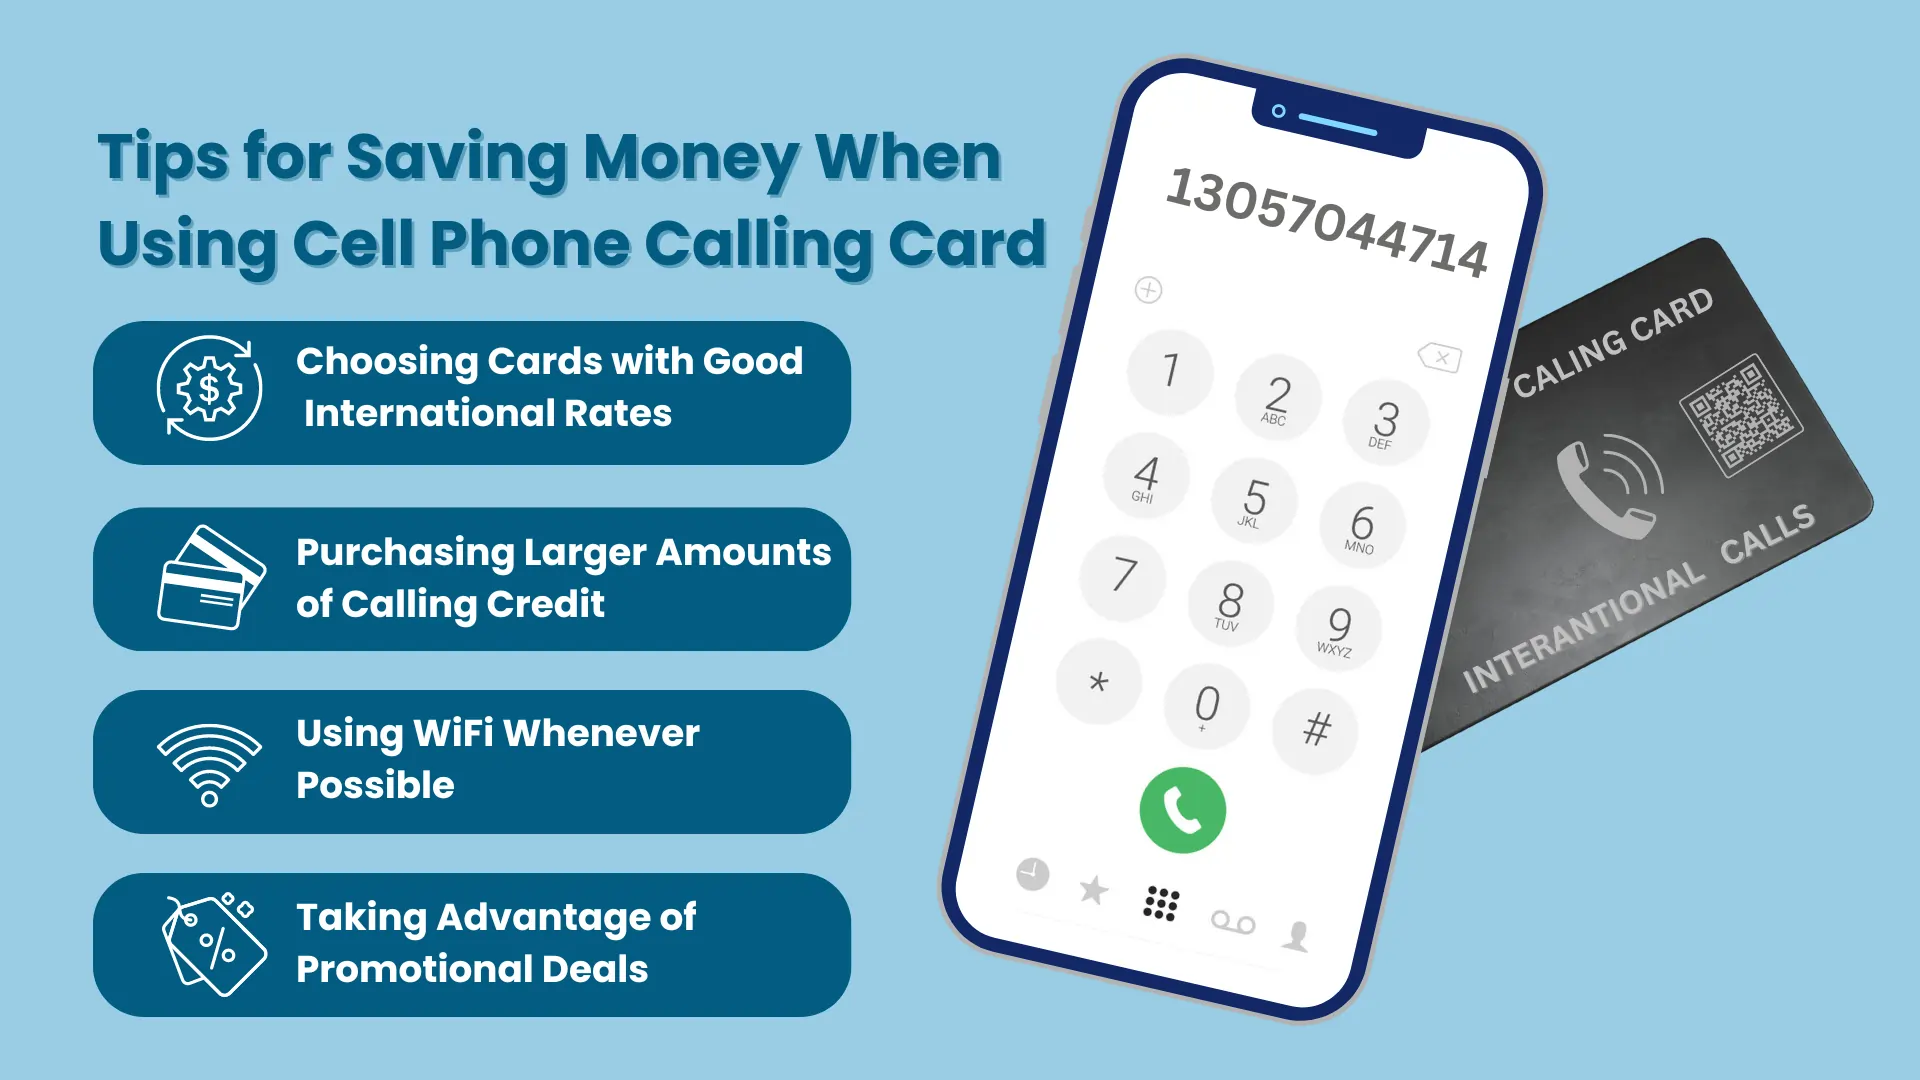 Tips for Saving Money When Using a Cell Phone Calling Card